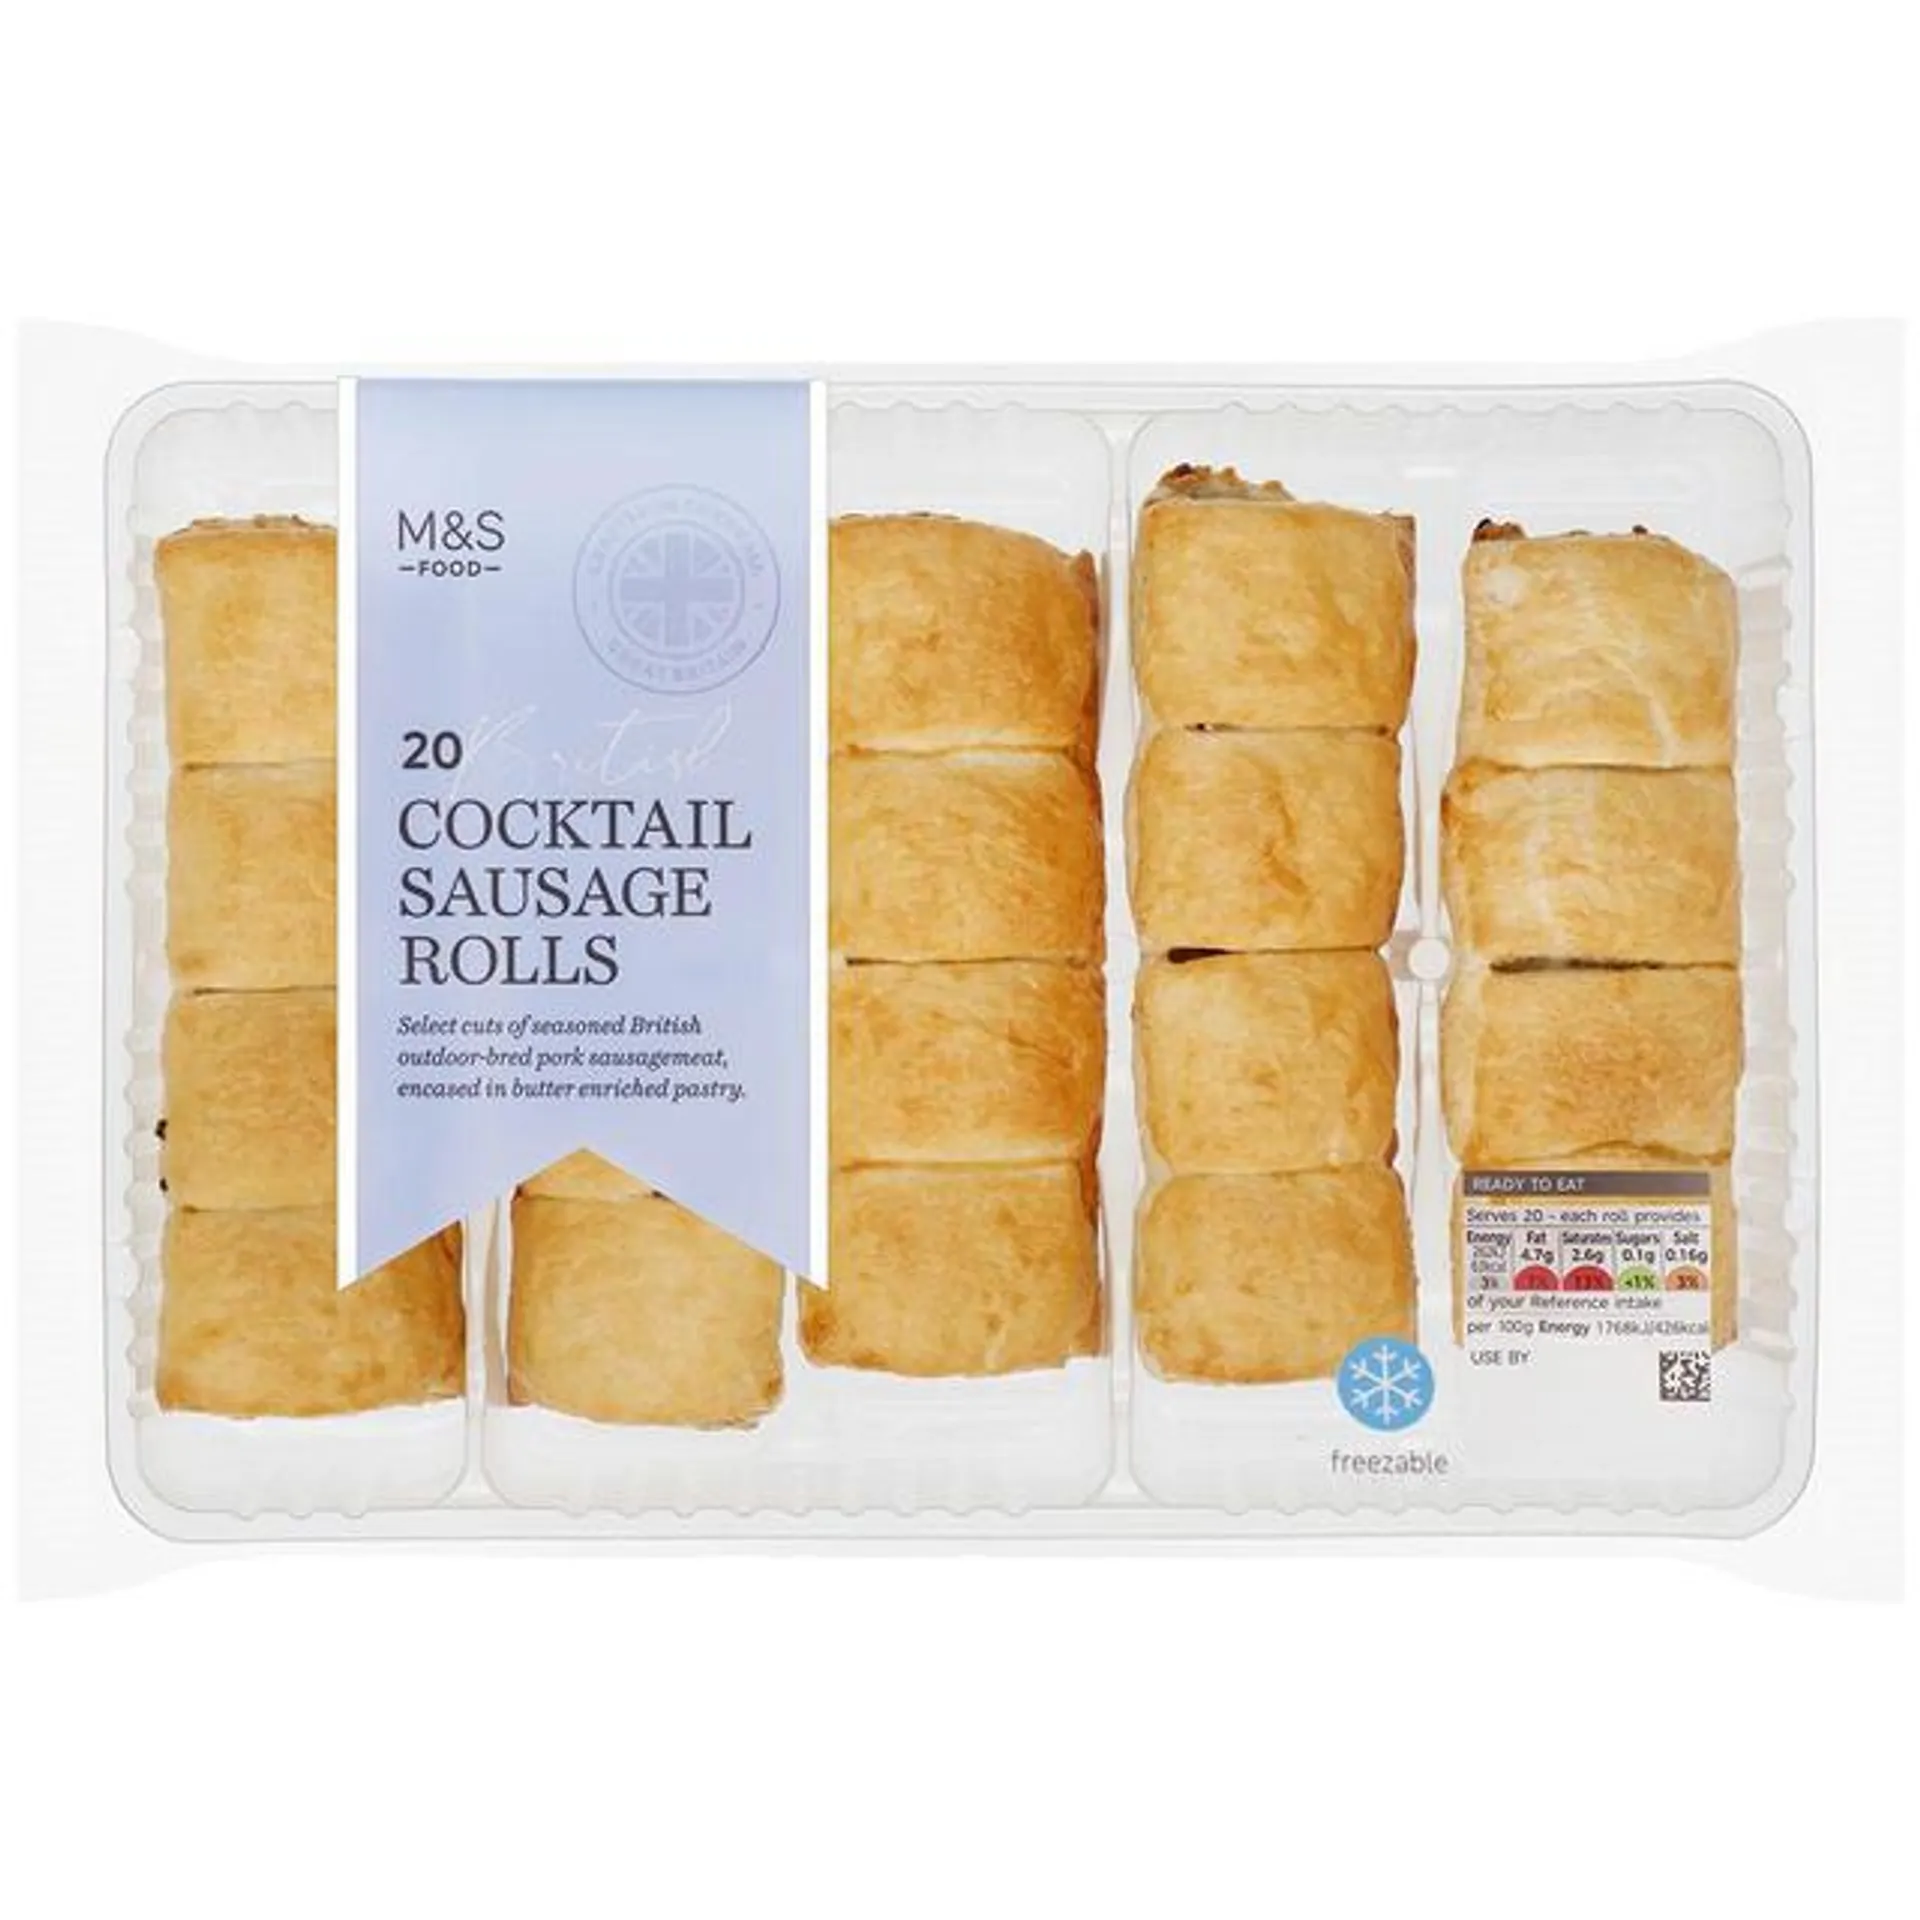 M&S 20 Cocktail Sausage Rolls 20 per pack